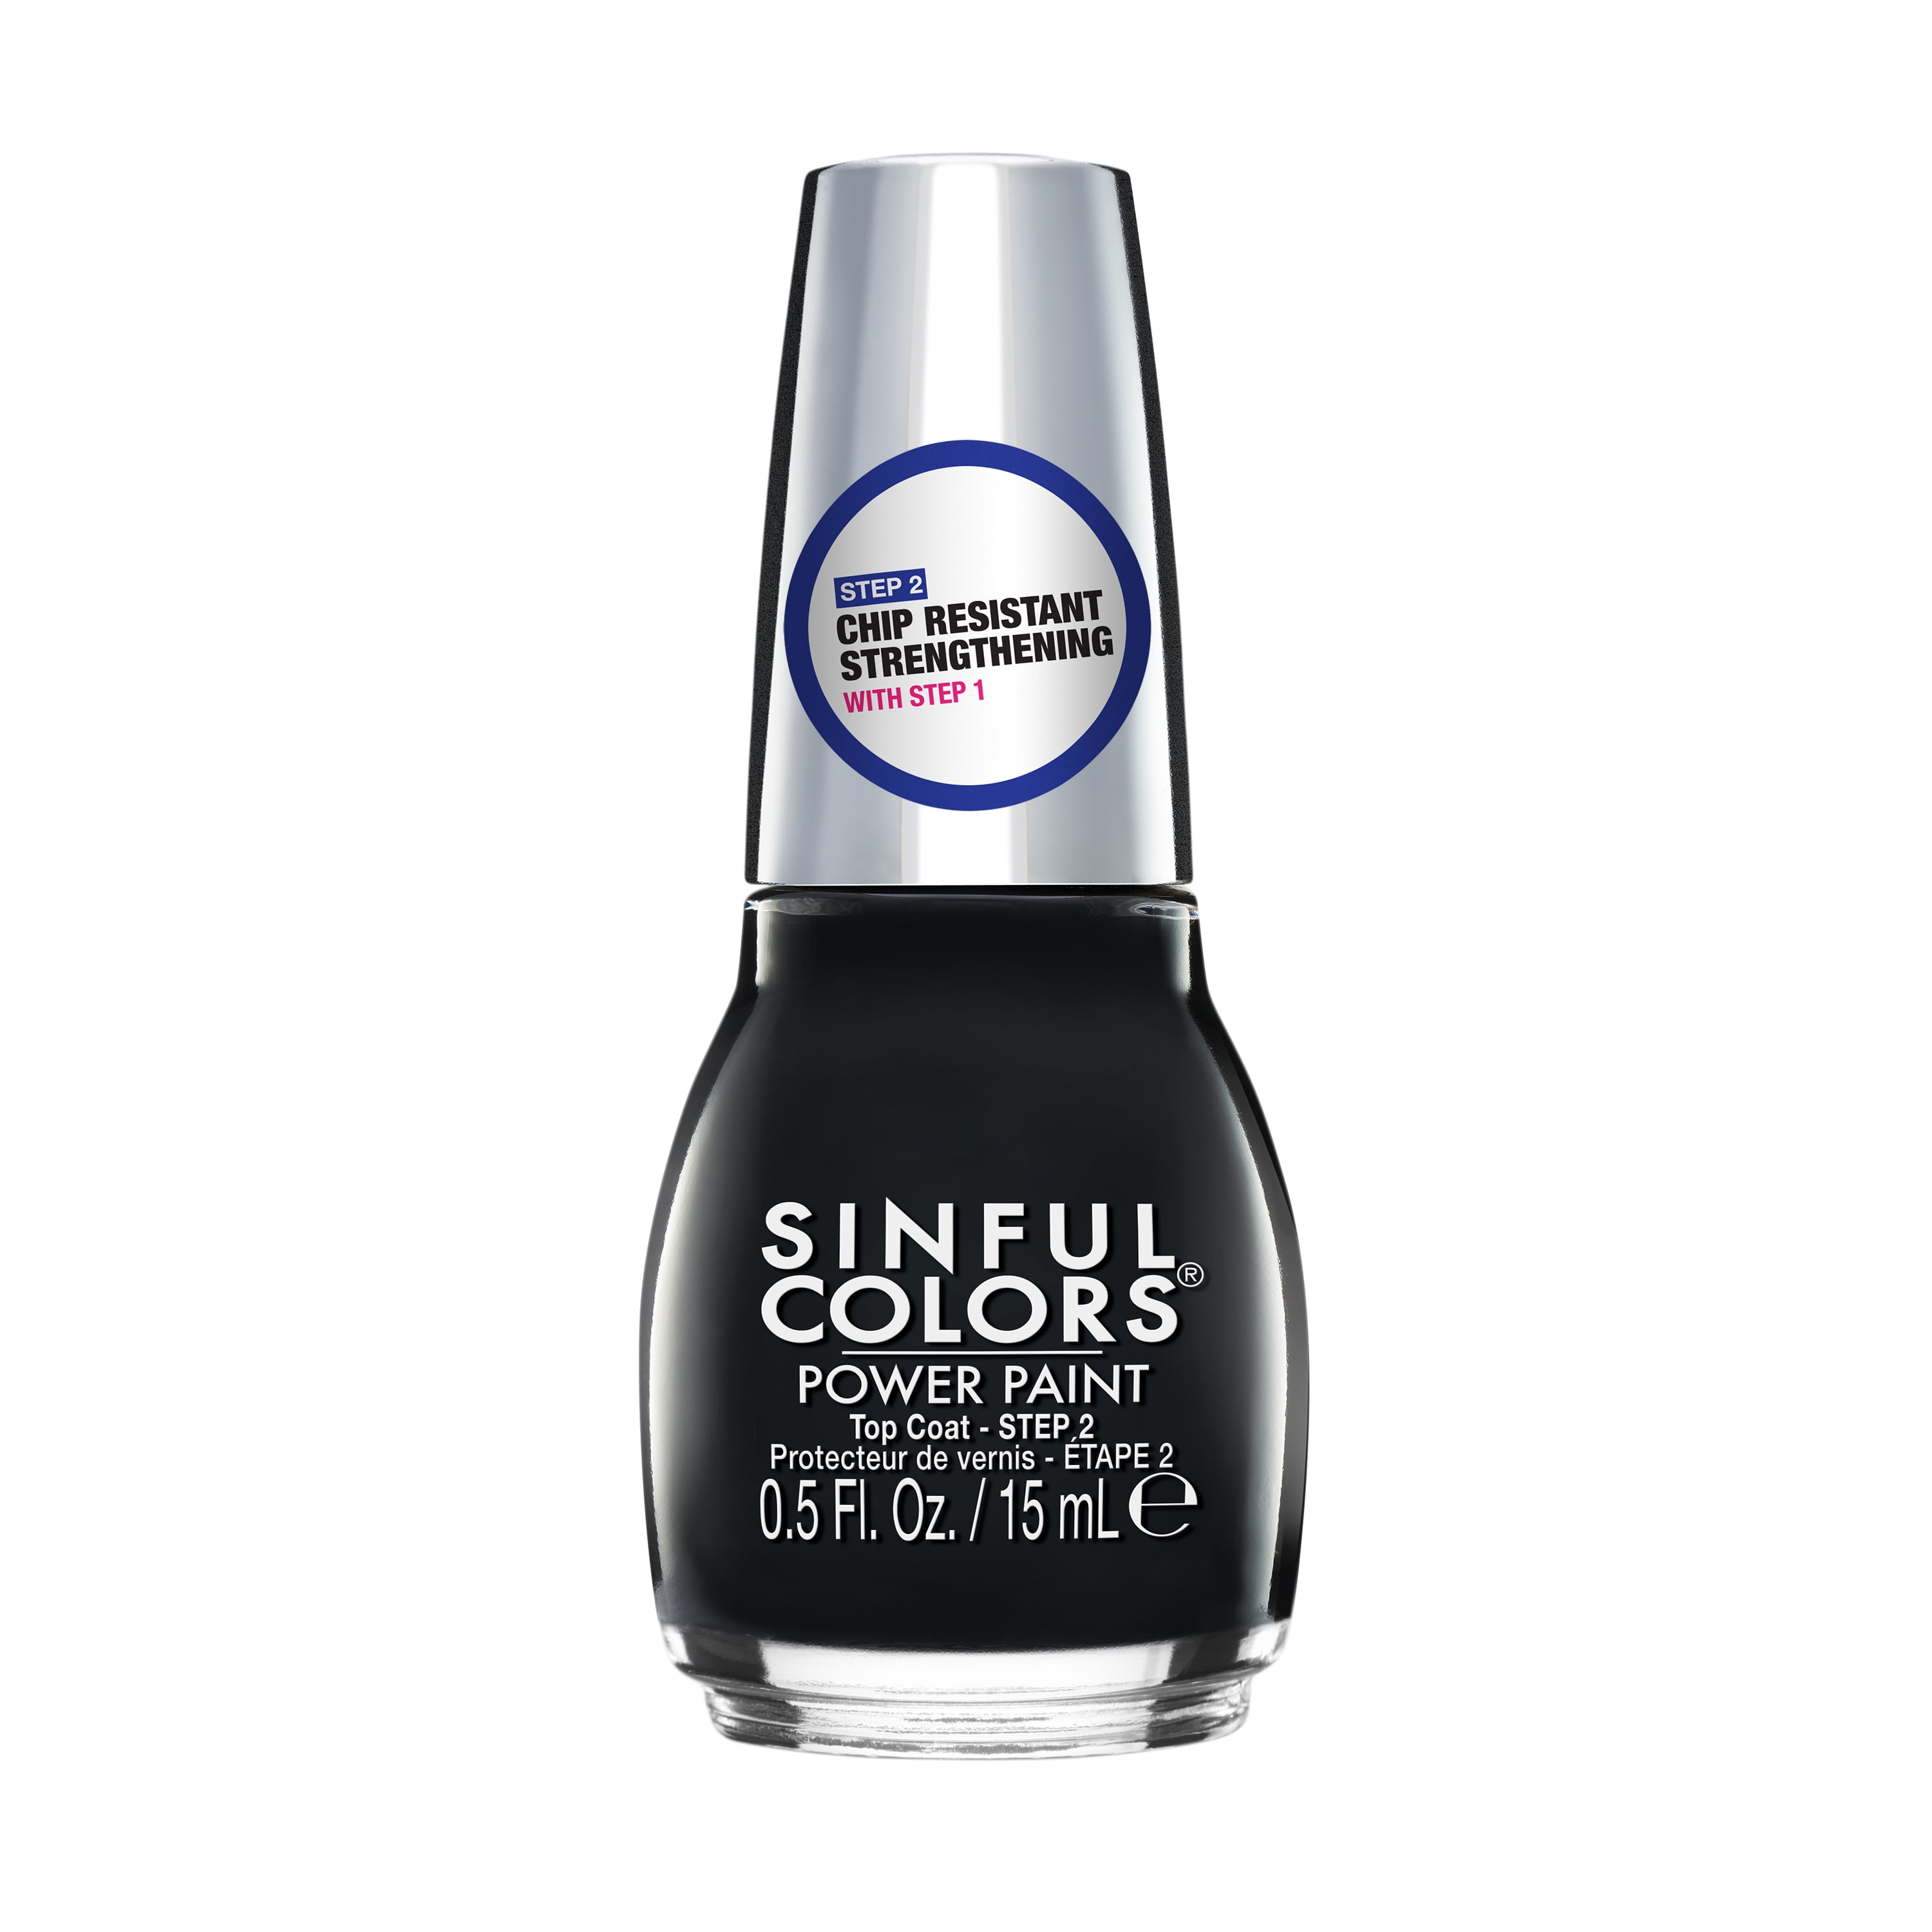 Disguise Cosmetics Happy Healthy Nail Paint - Top Coat (Crystal Clear 100)  Price - Buy Online at ₹160 in India